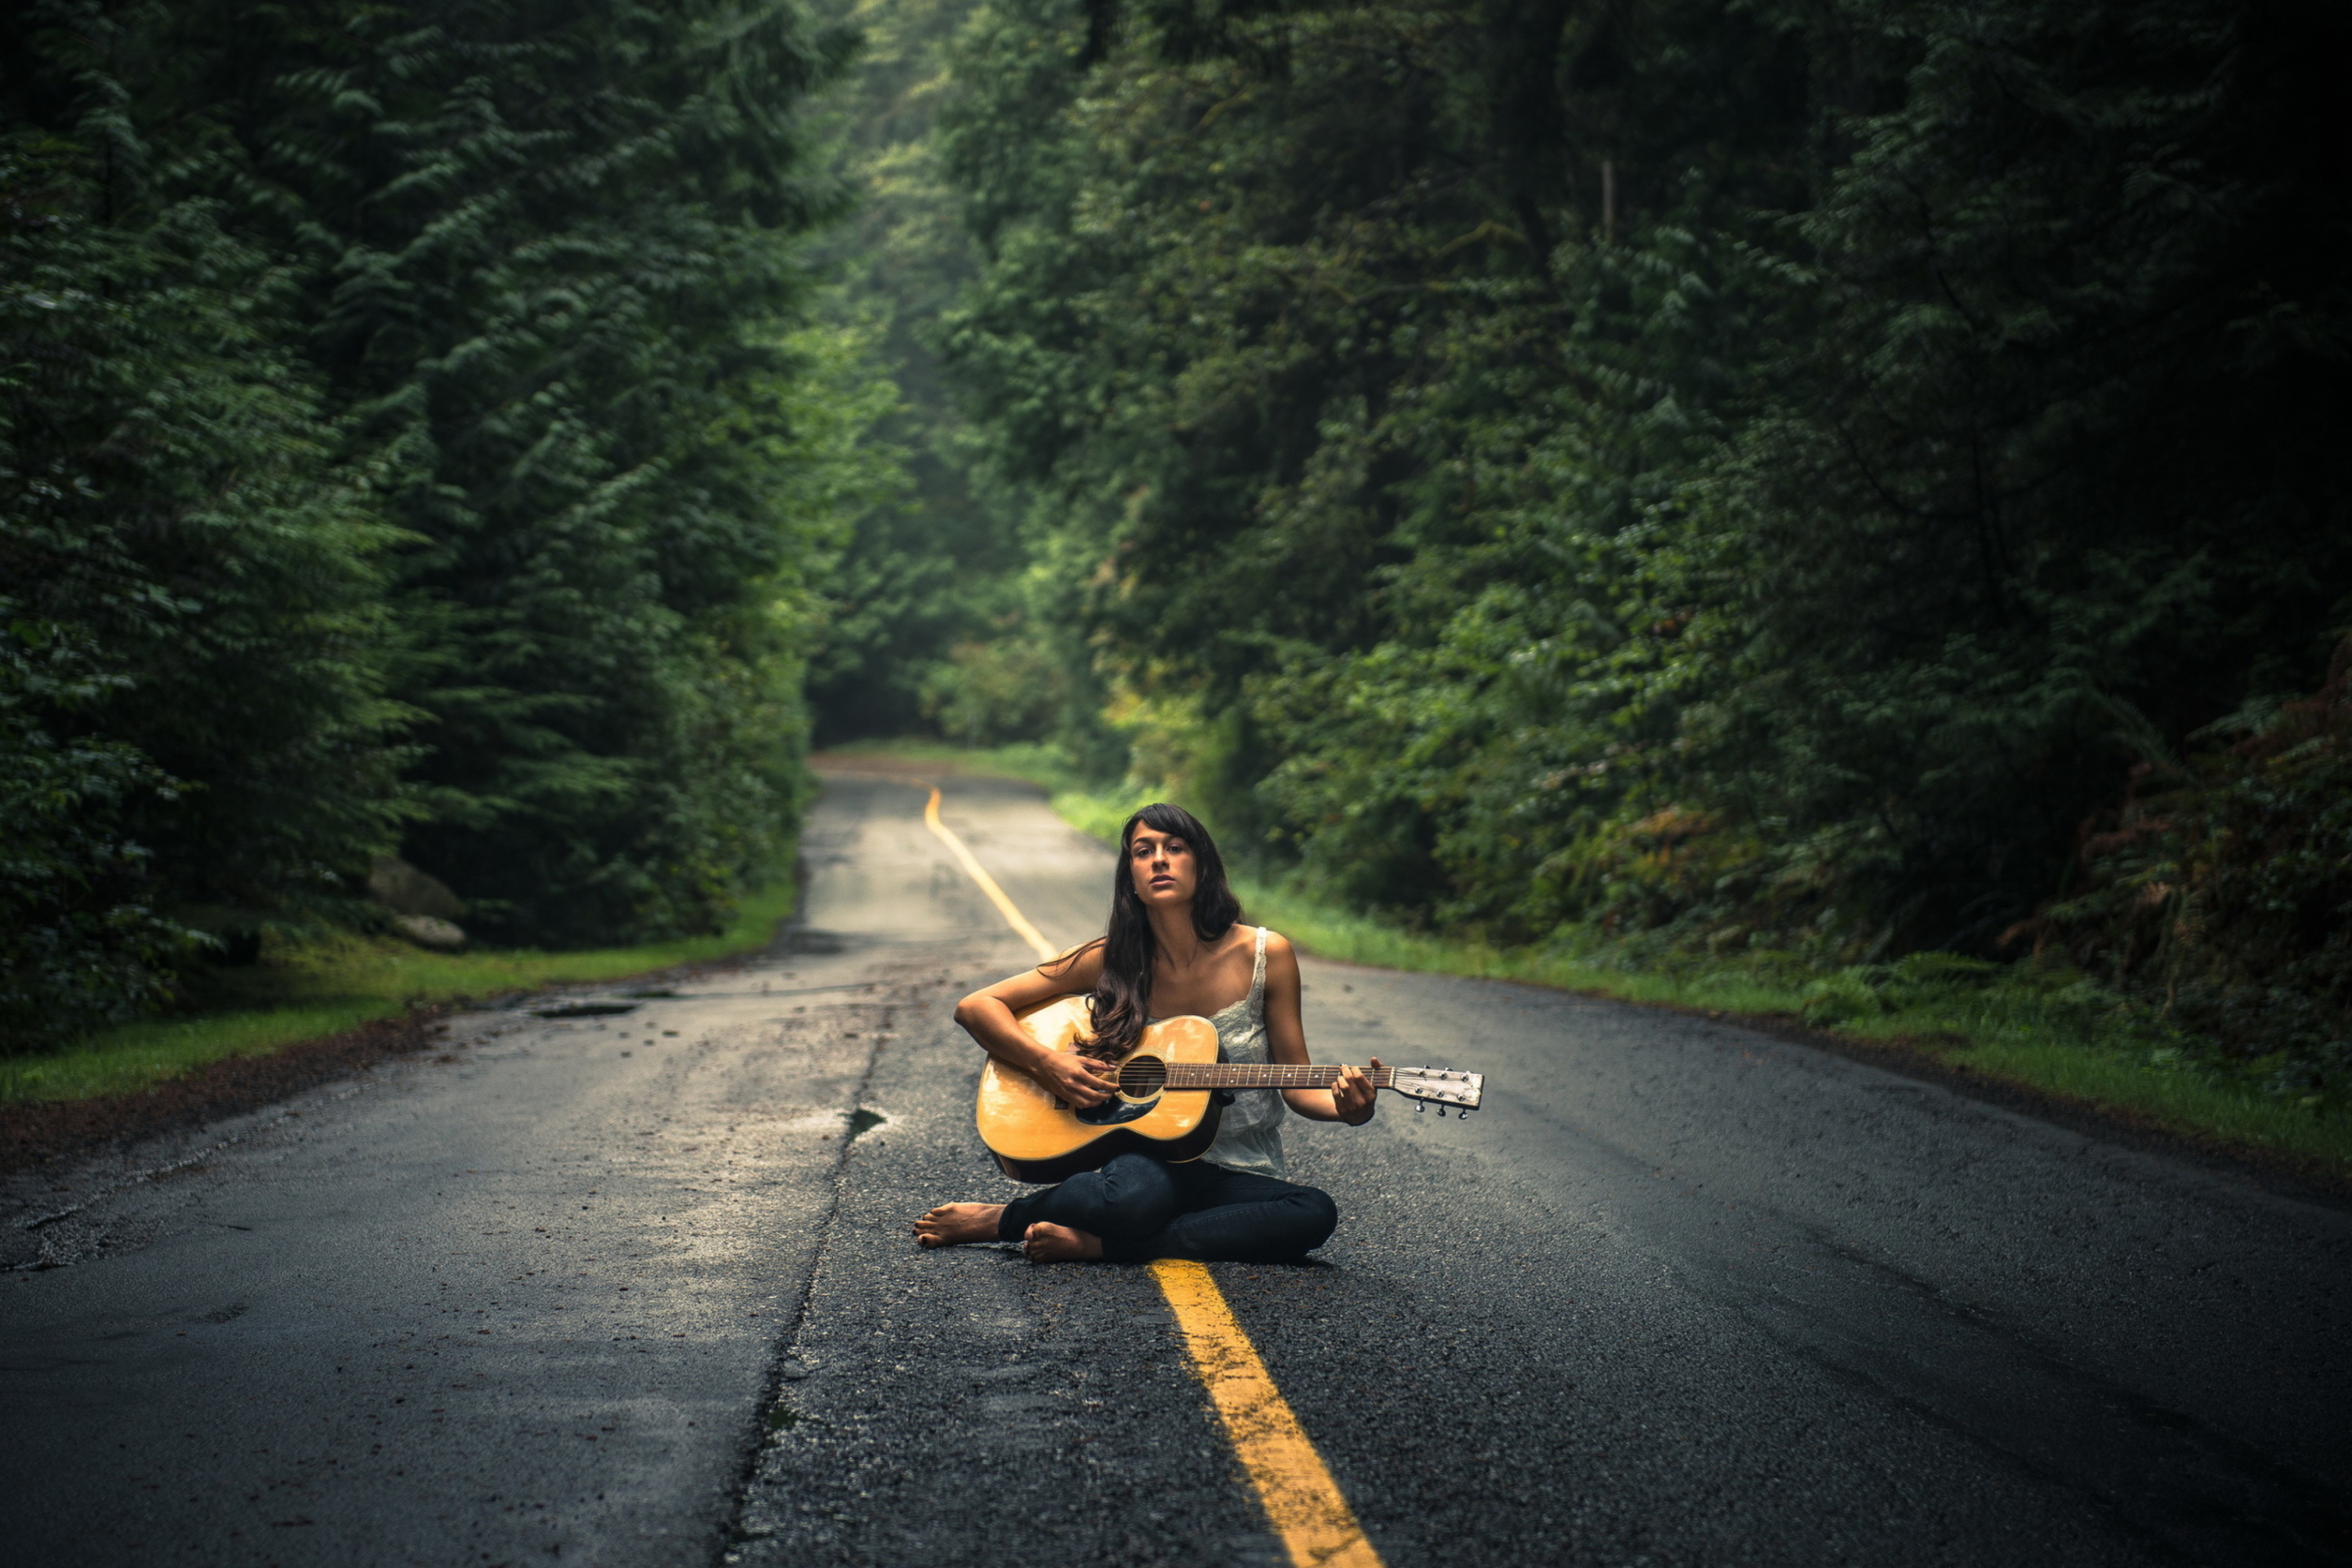 Das Girl Playing Guitar On Countryside Road Wallpaper 2880x1920